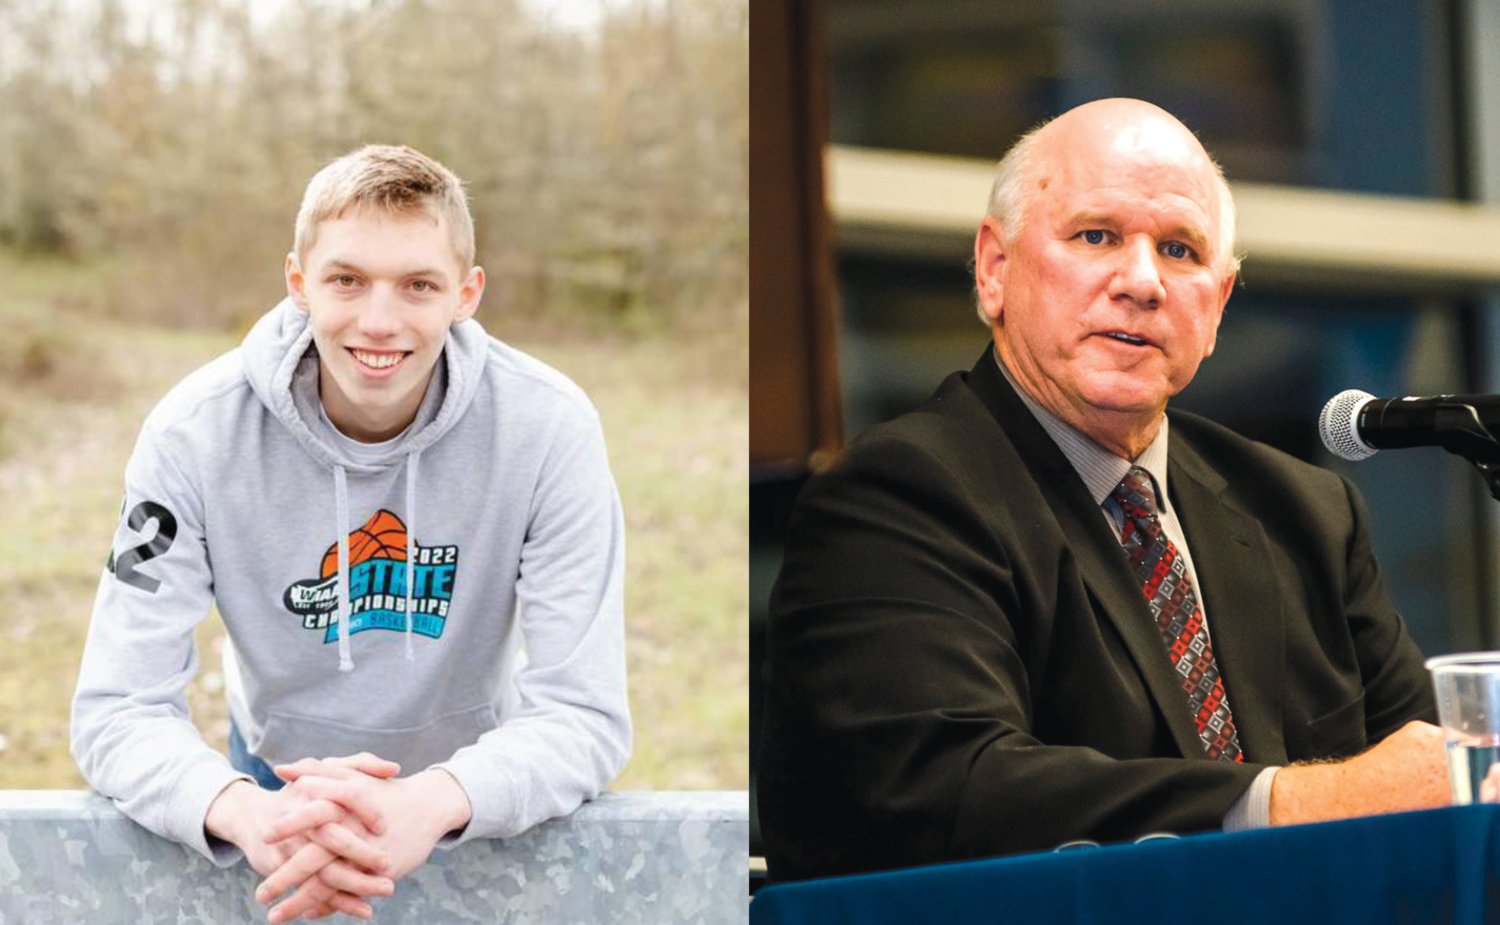 Gary Dotson, left, is the first recipient of the inaugural Gary Stamper scholarship, fueled by the Economic Alliance of Lewis County's Gary Stamper Scholarship Fund, founded this year. On the right is Gary Stamper, who died of COVID-19 last year.